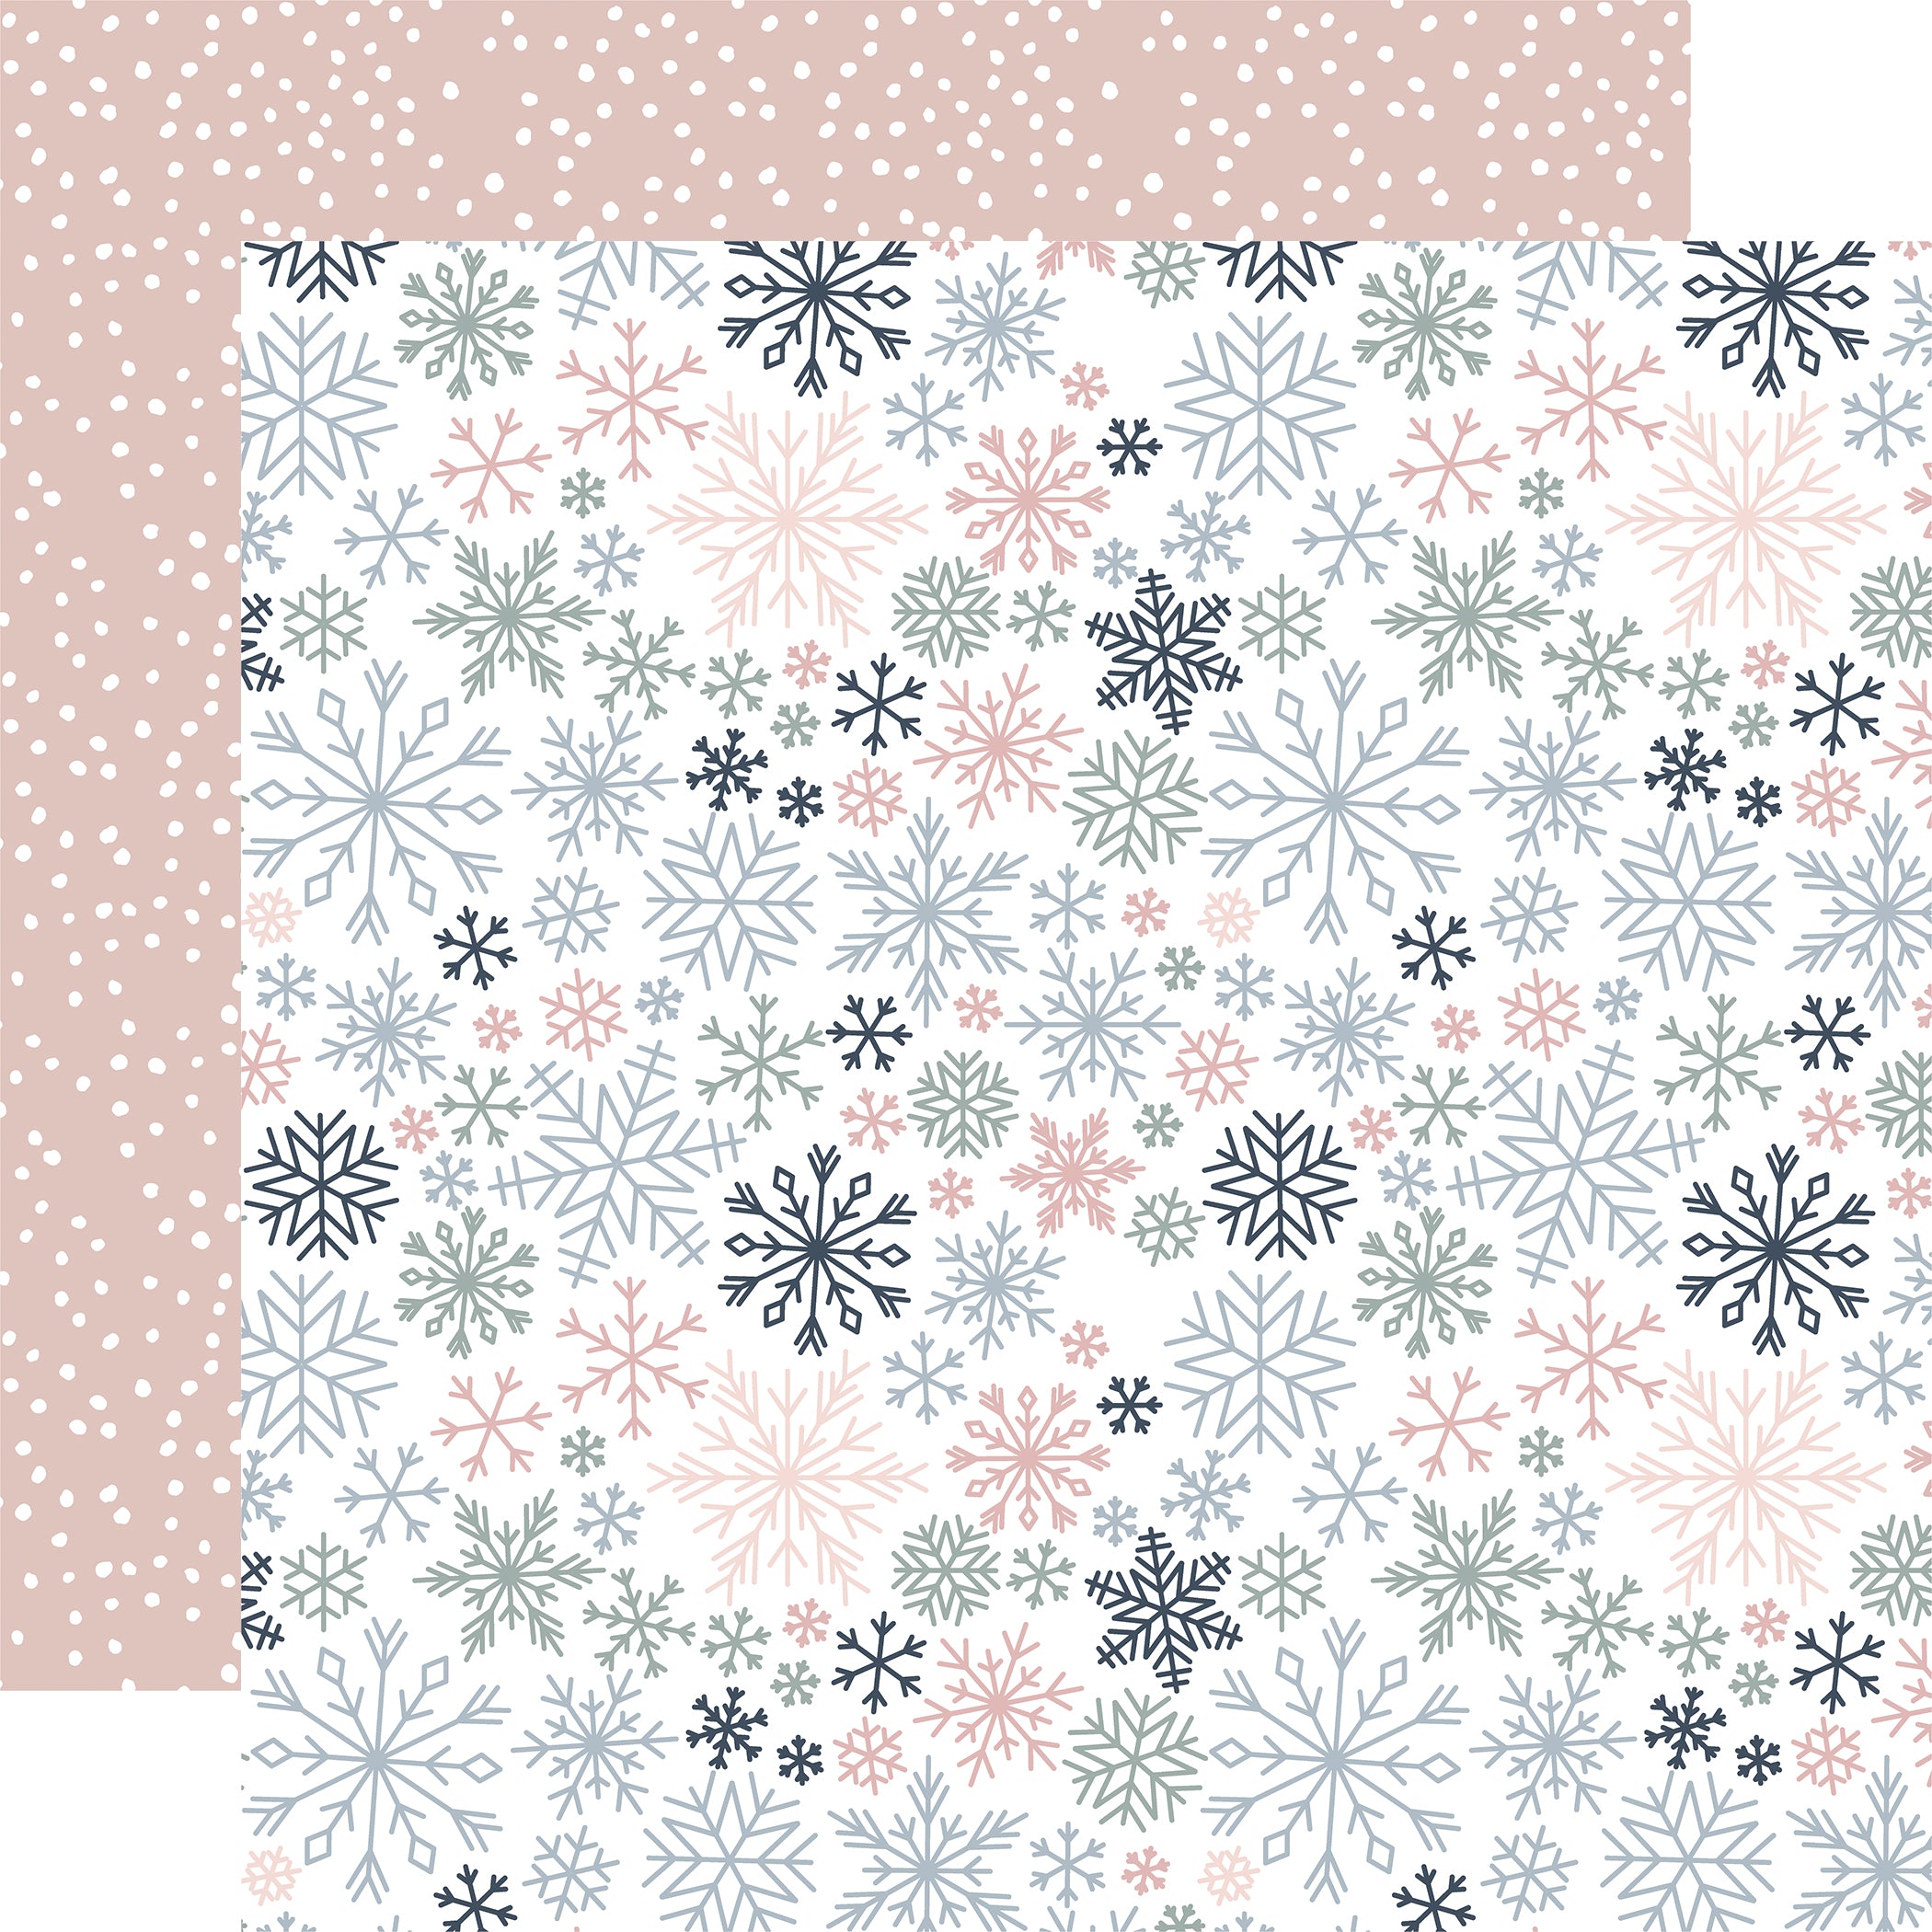 Winterland Collection Wintertime 12 x 12 Double-Sided Scrapbook Paper by Echo Park Paper